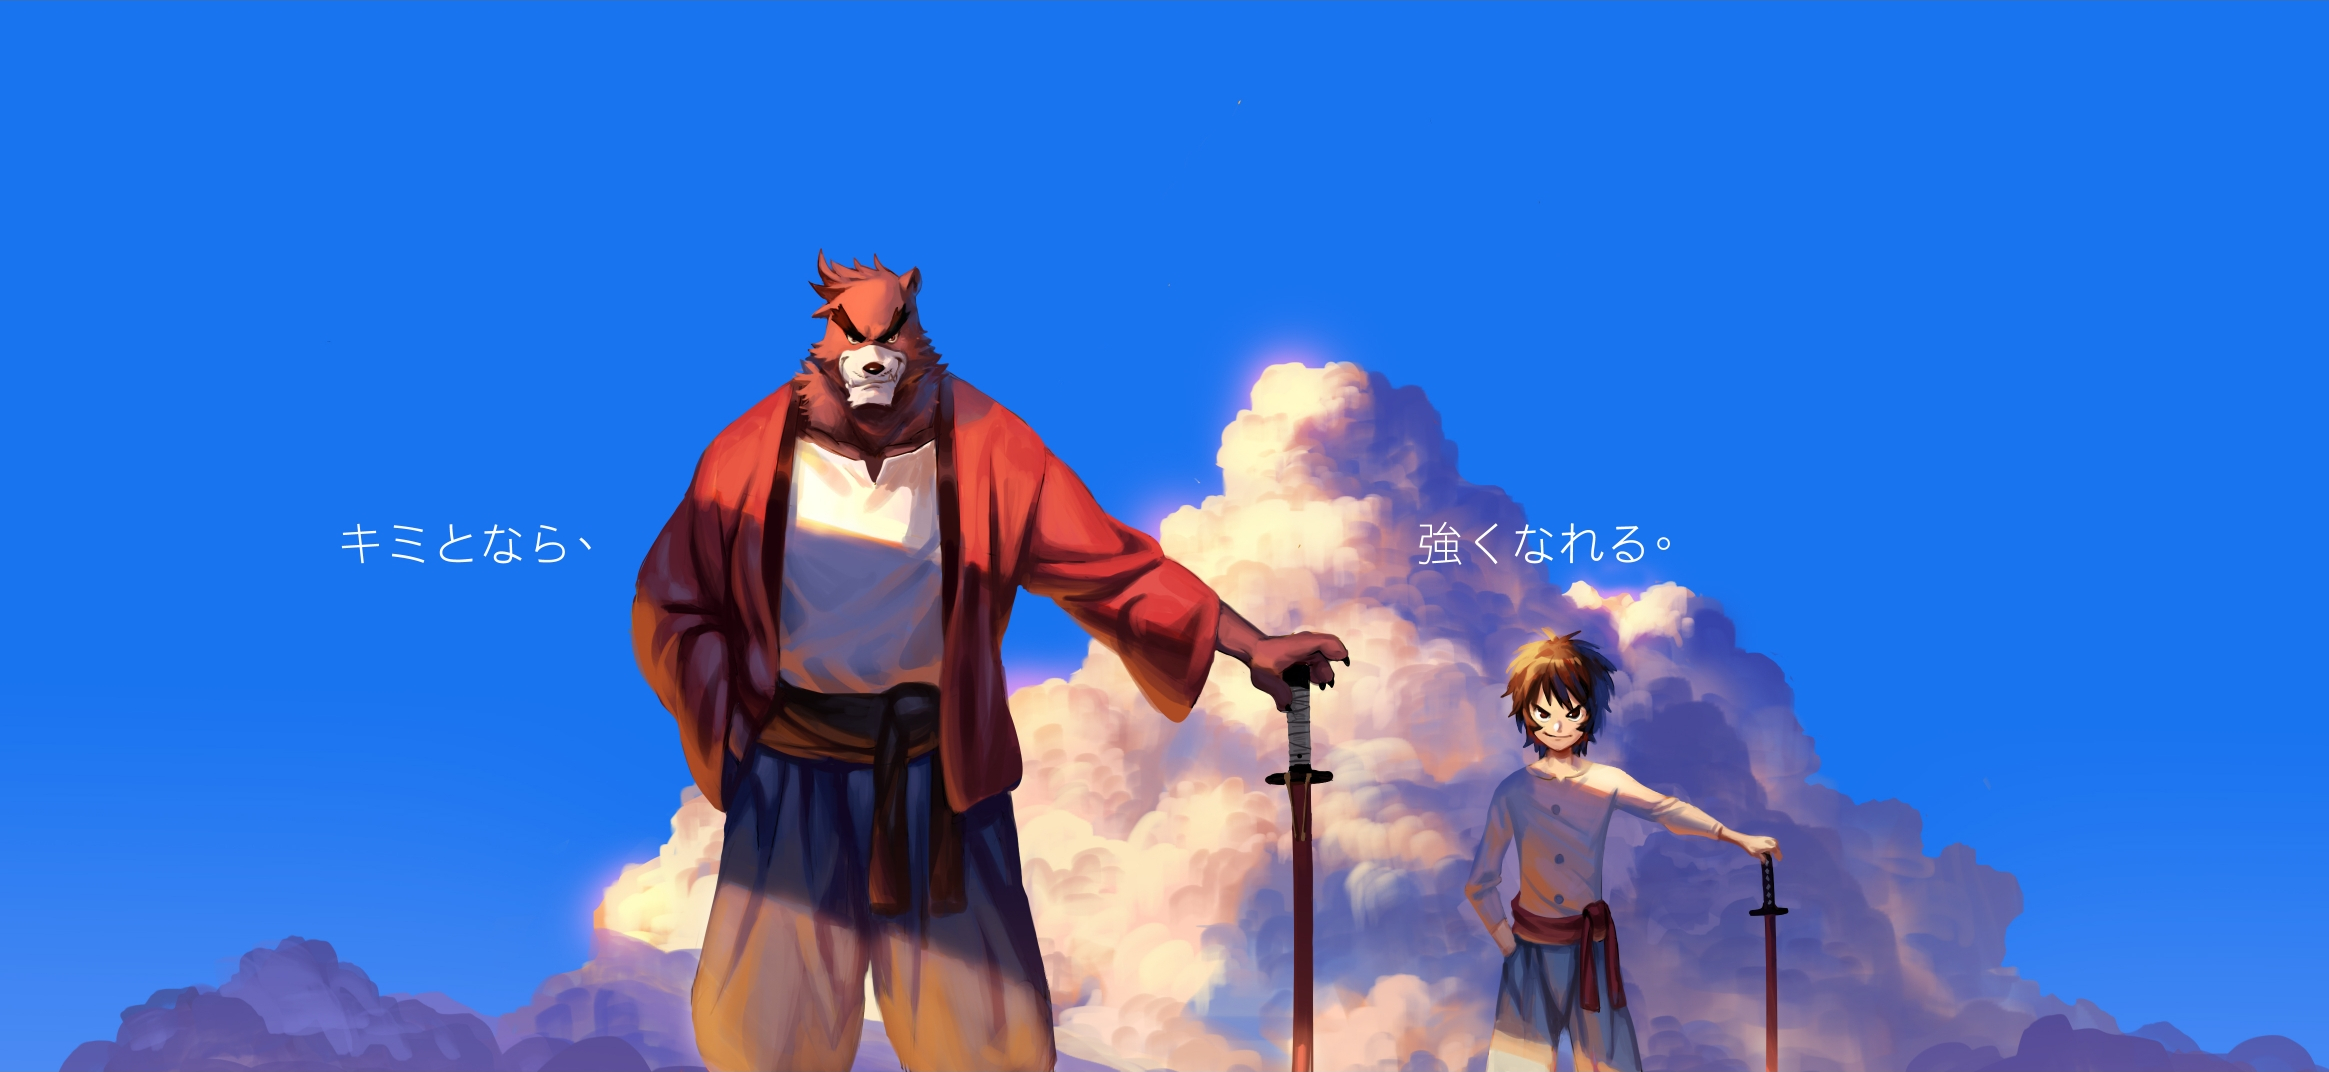 Anime The Boy and the Beast HD Wallpaper | Background Image